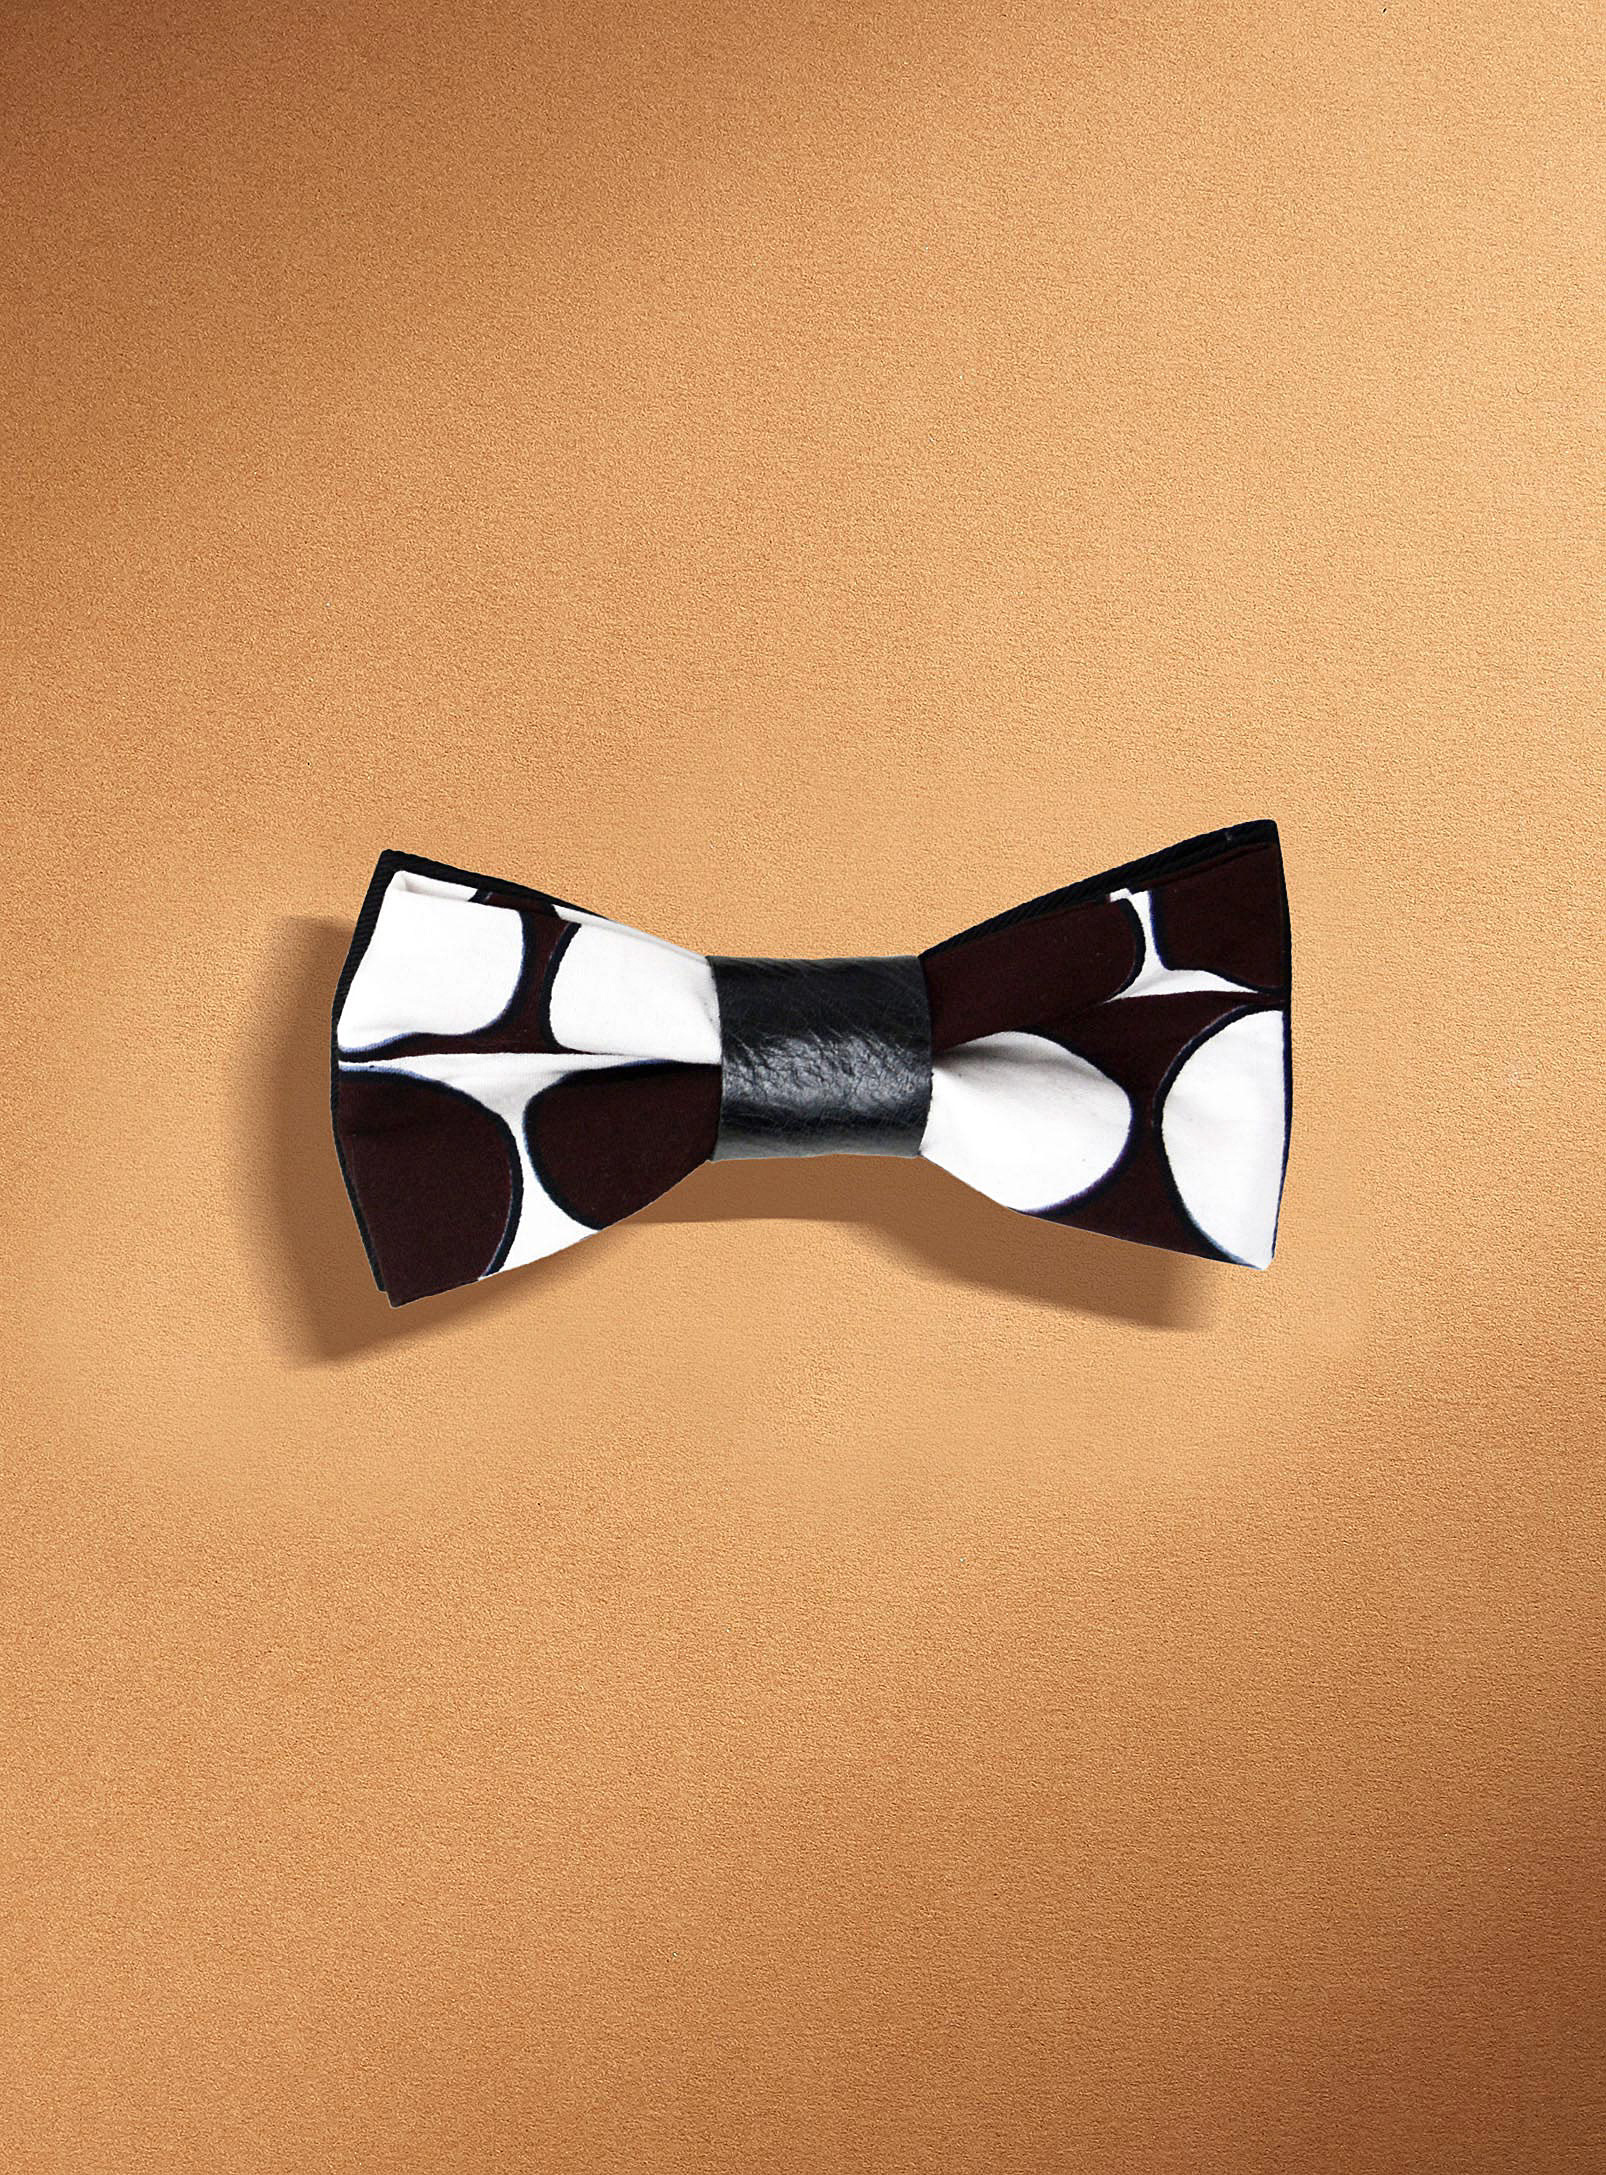 Coo-Mon - White and brown polka dot bow tie